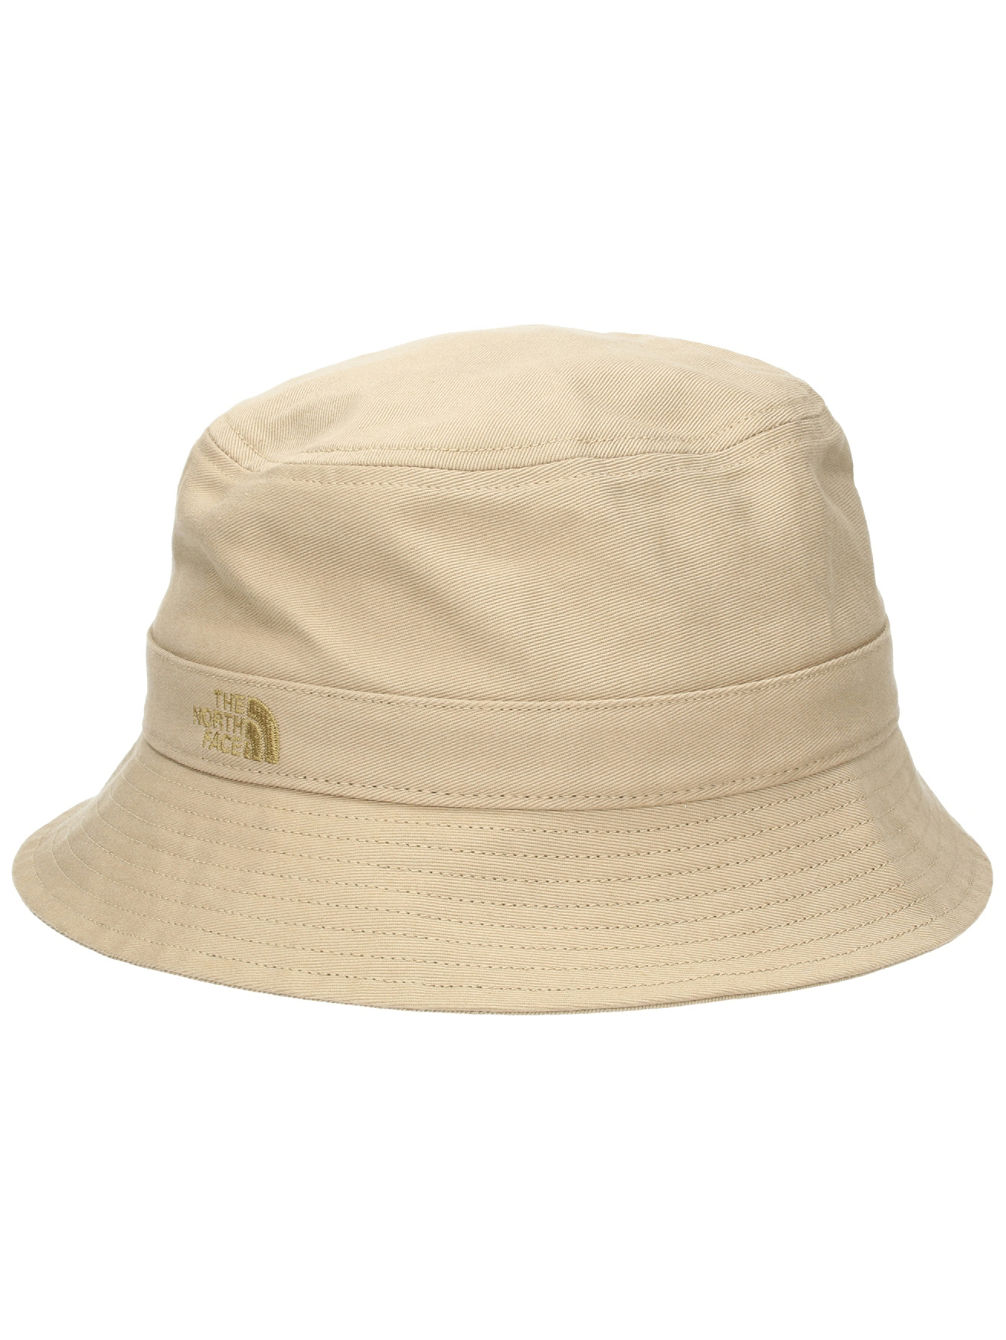 Buy THE NORTH FACE Vl Bucket Hat online at Blue Tomato